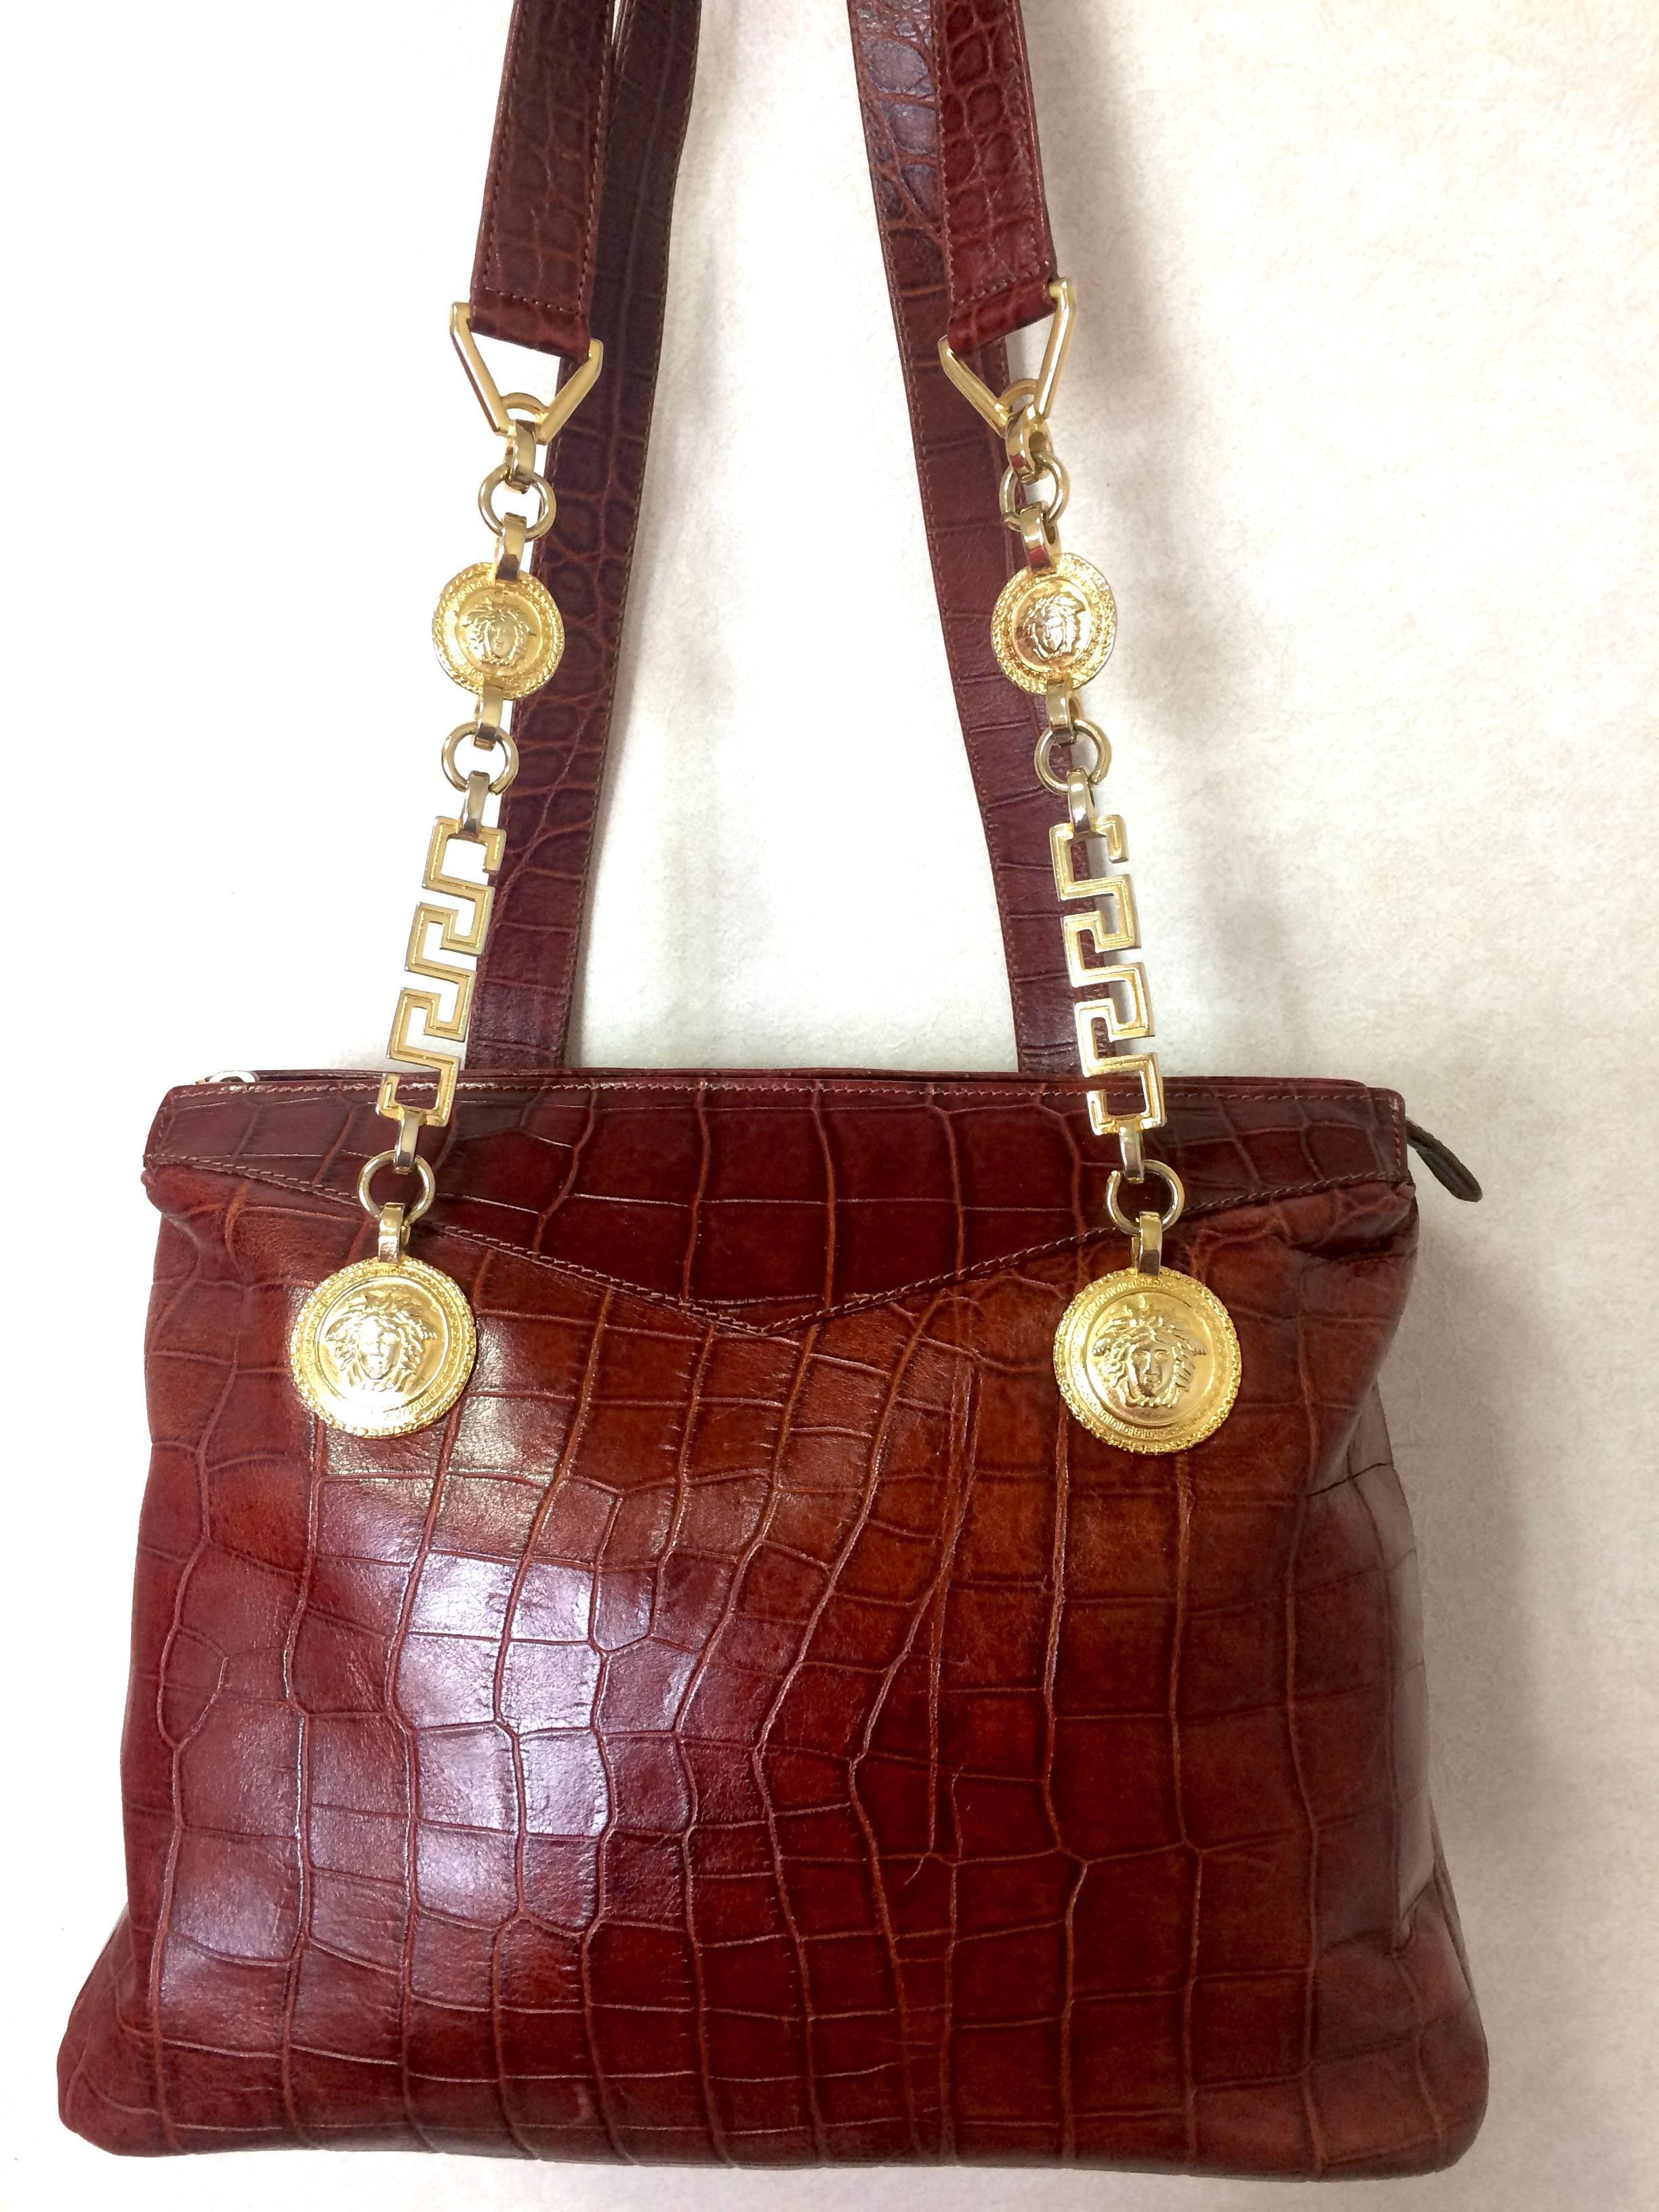 1990s. Vintage Gianni Versace brown croc-embossed leather shoulder tote bag with golden hardware and medusa charms.

Introducing another rare vintage masterpiece from Gianni Versace back in the 90's.
If you are looking for vintage masterpiece from